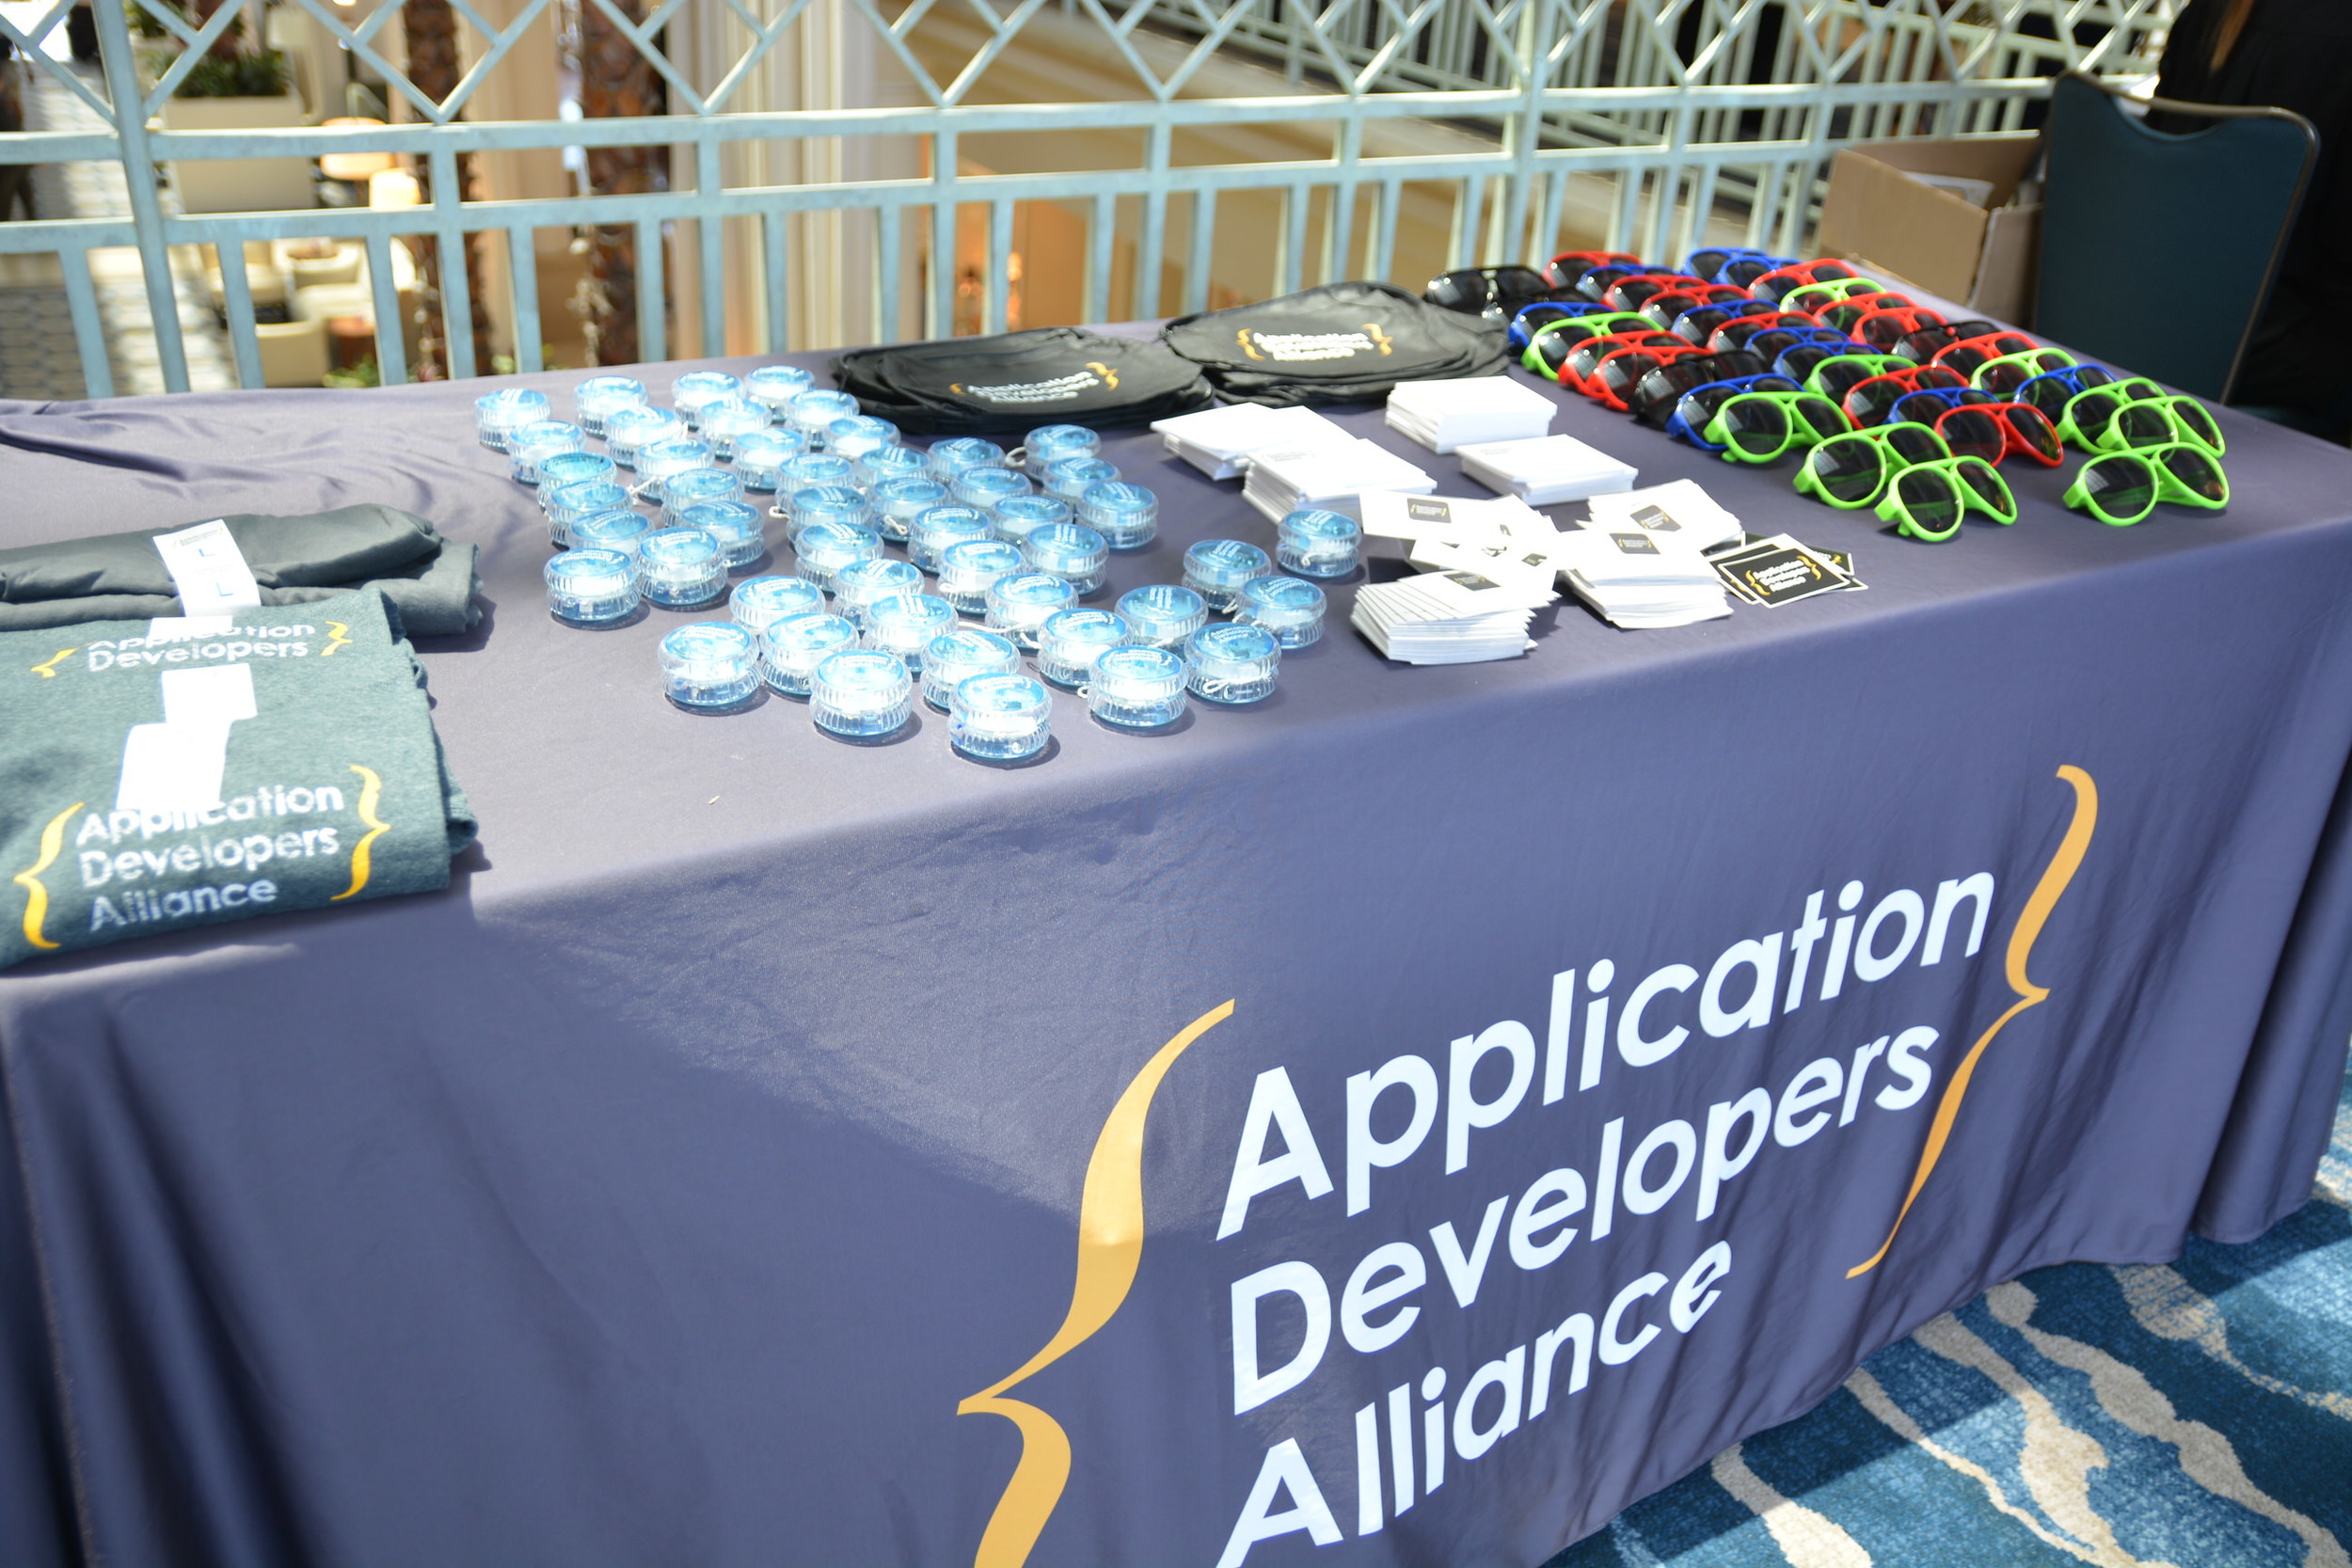 The Alliance table was filled with swag!